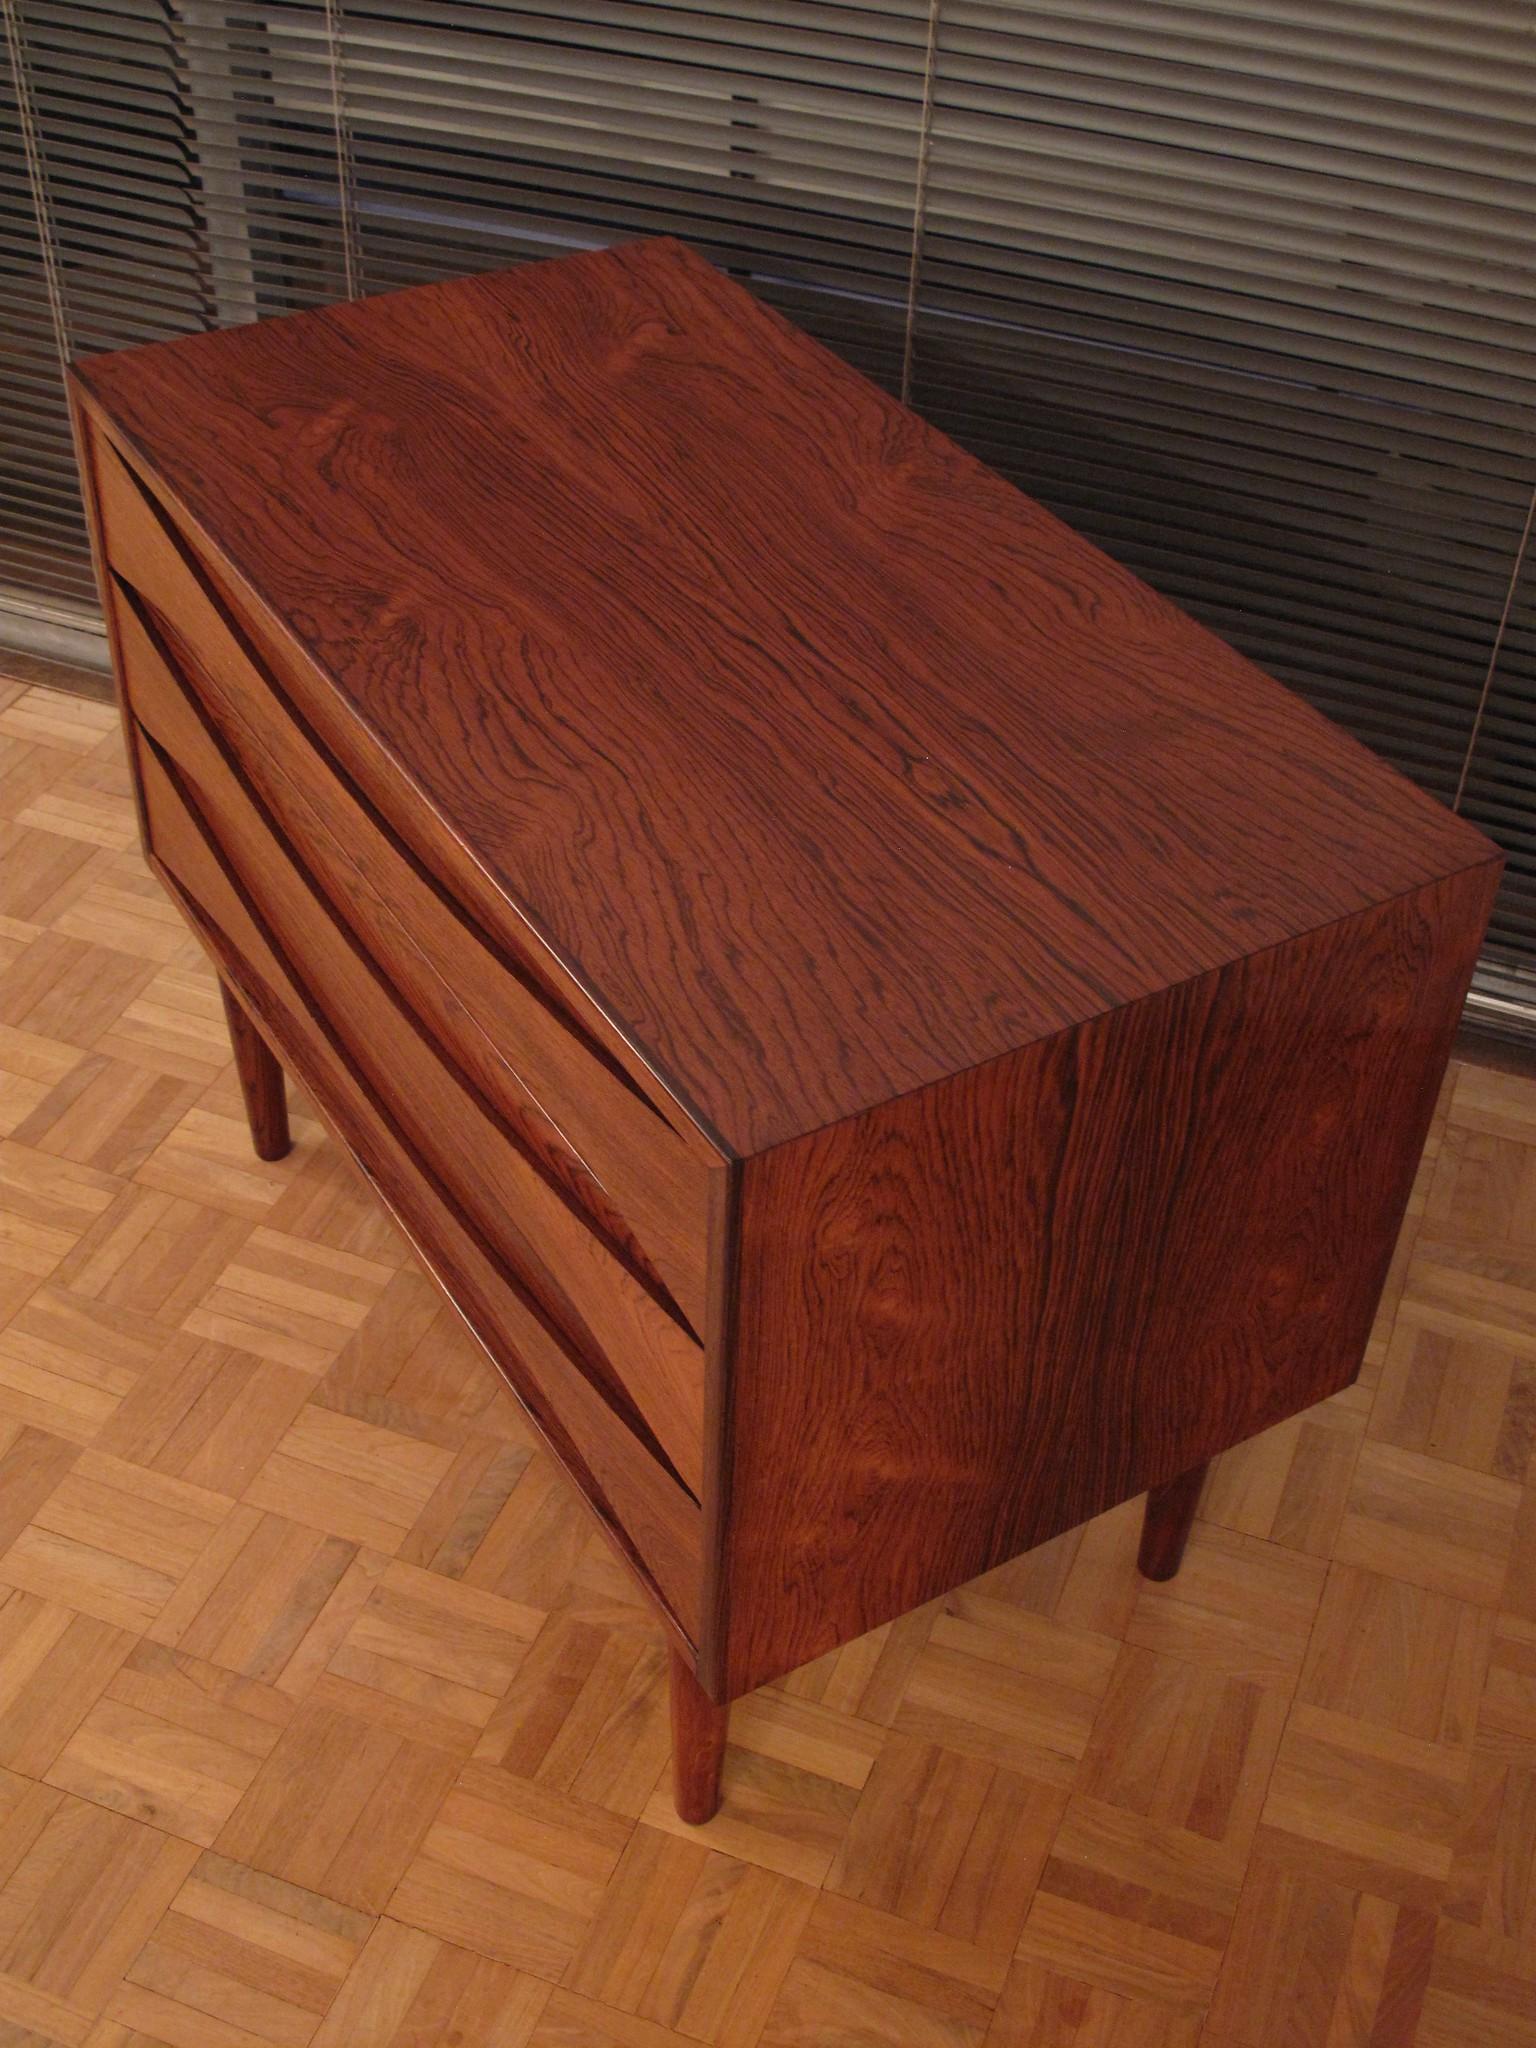 Mid-20th Century Niels Clausen Arne Vodder Rosewood Chest Of Drawers For N.C Mobler